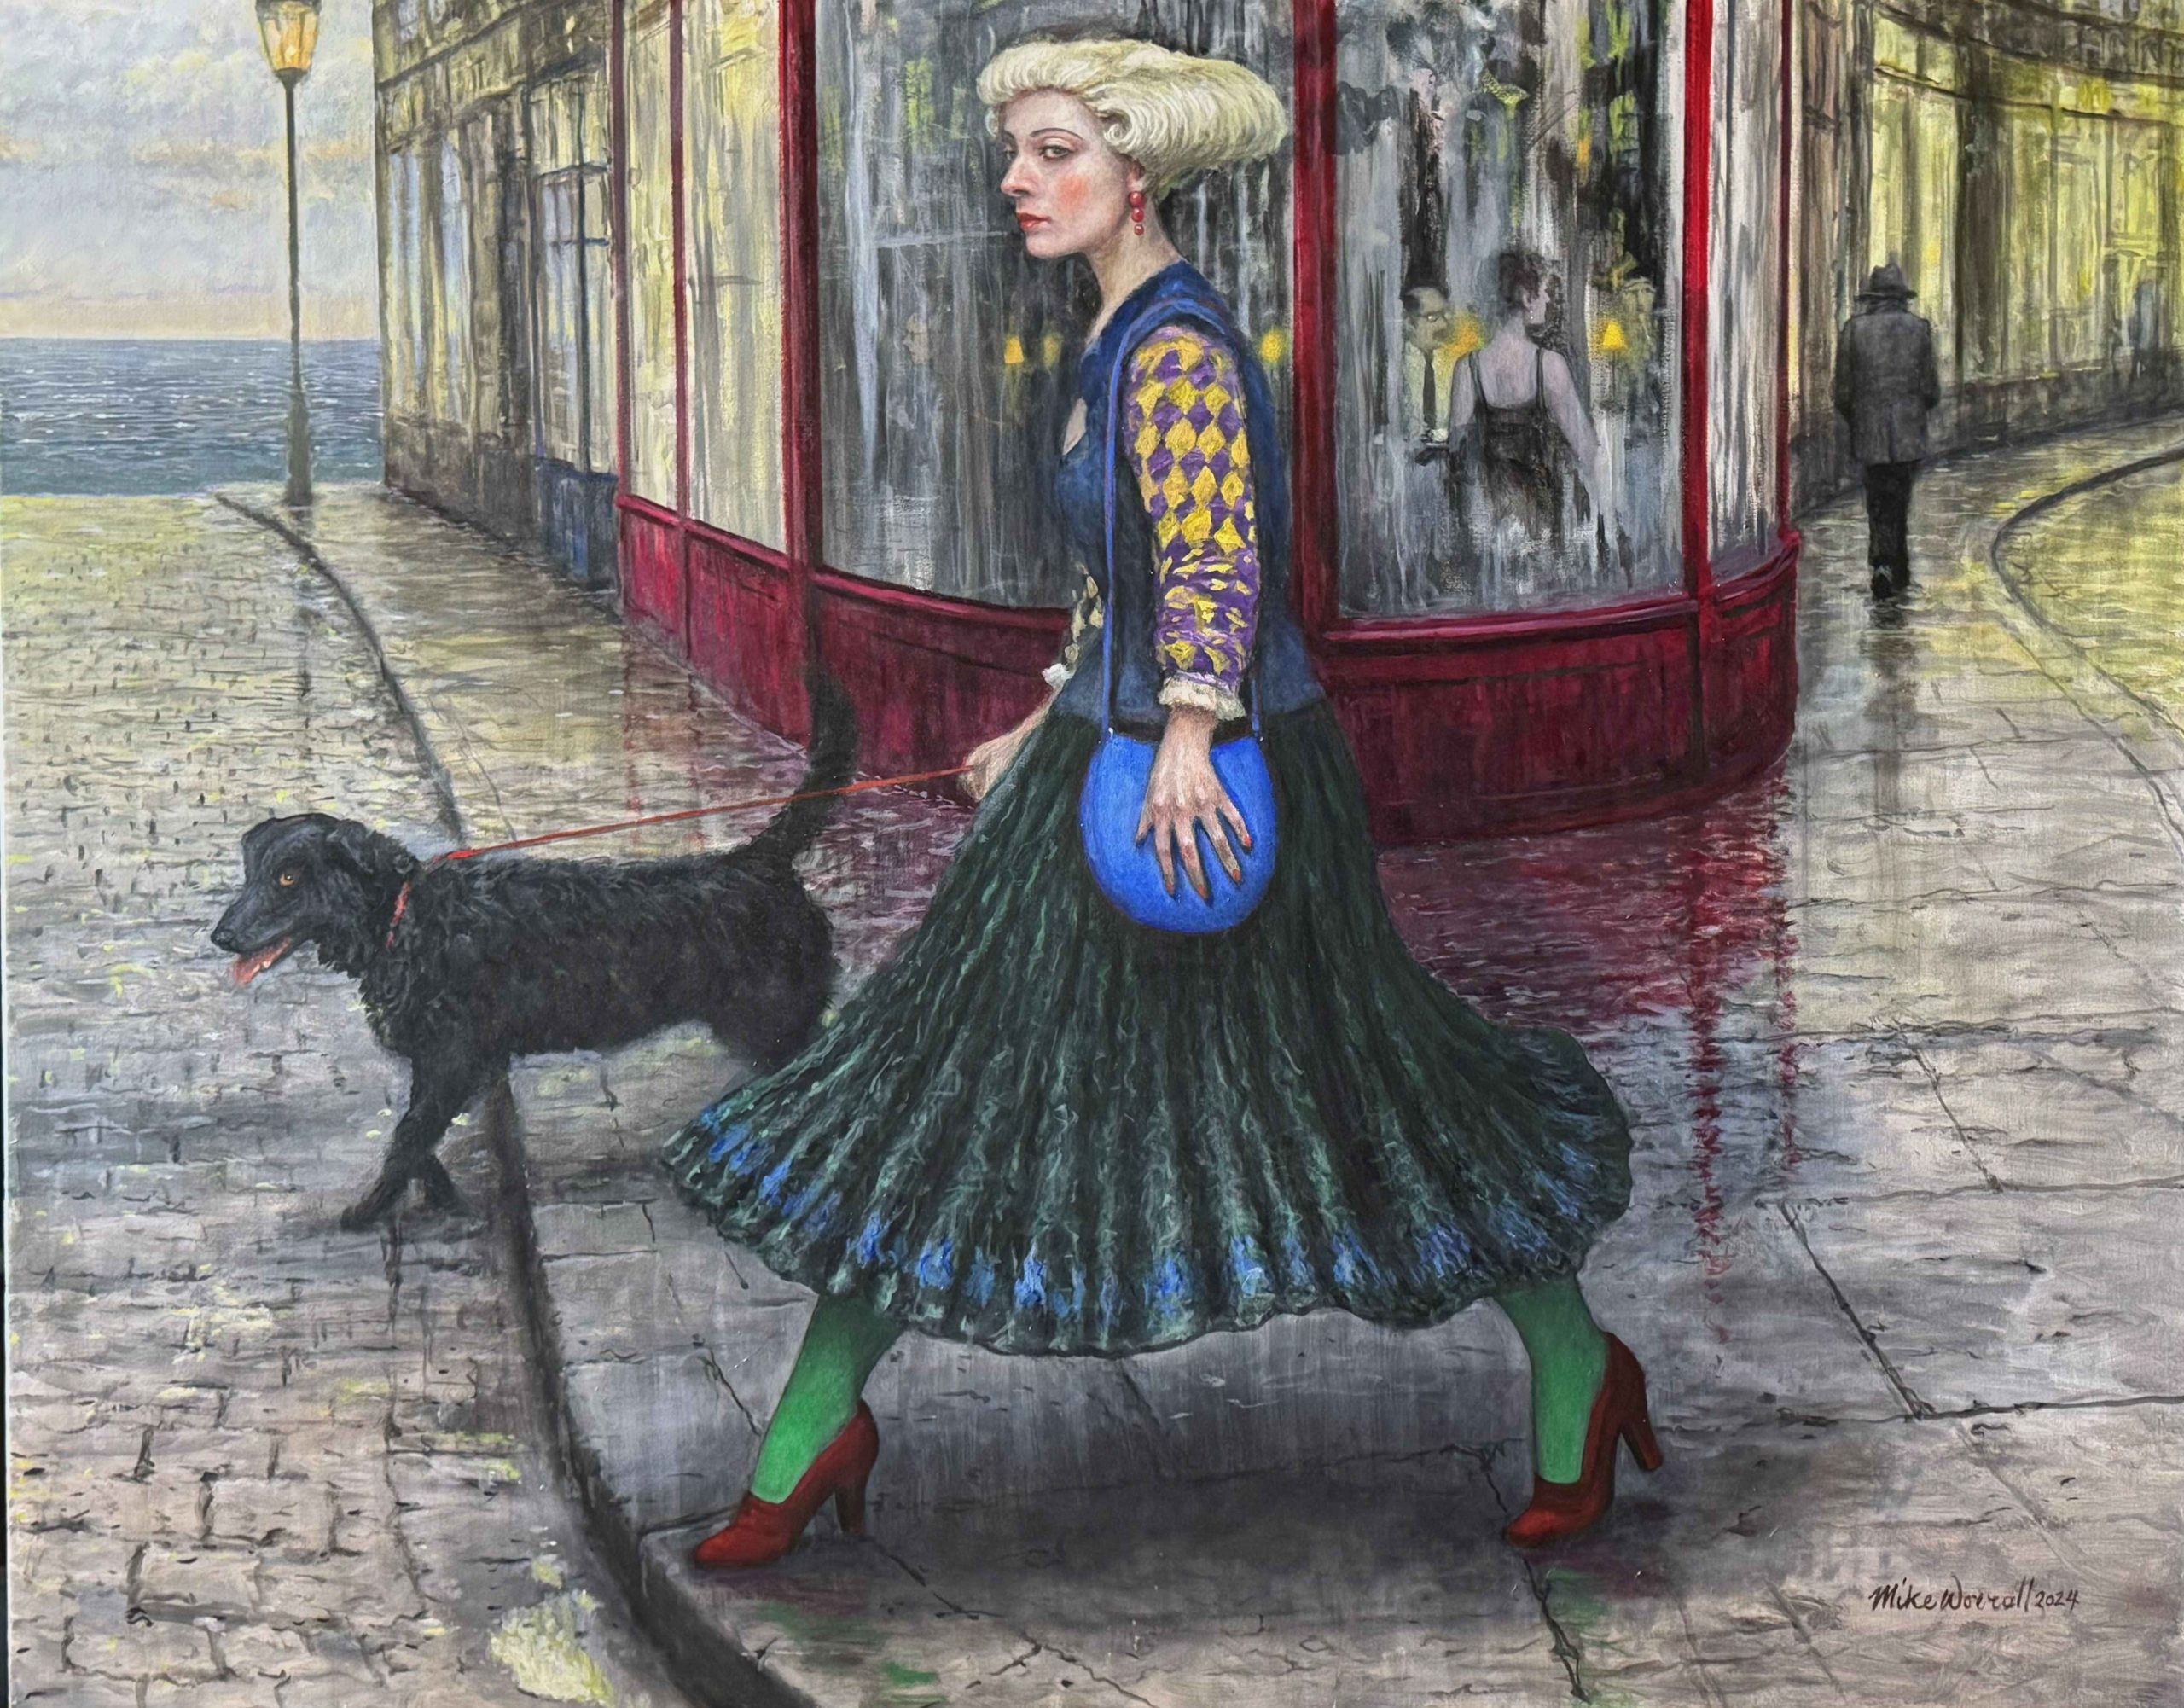 Mike Worrall 'Stepping Out' oil on canvas 122 x 152cm $25000